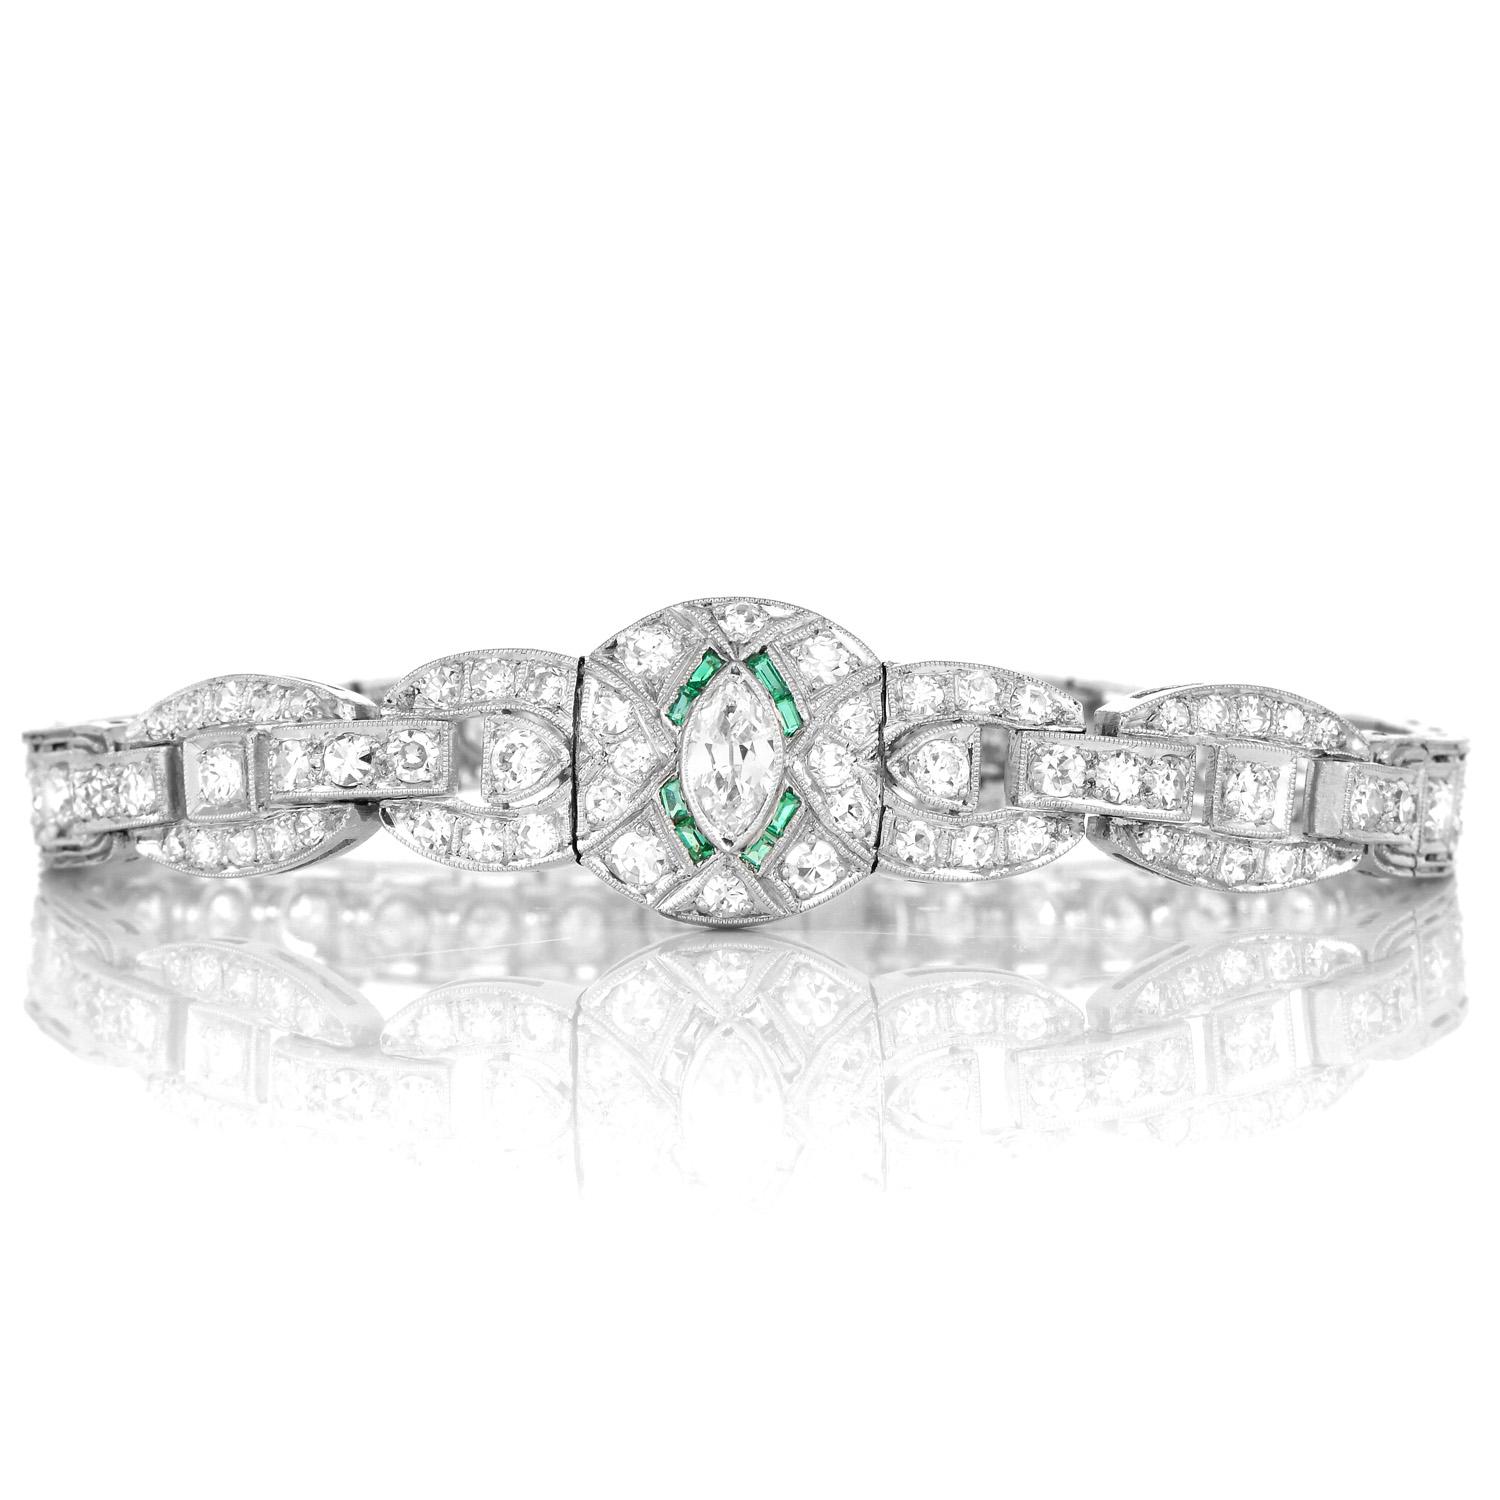 This Antique 1930s Rounded Geometric inspired Diamond and Emerald Bracelet was crafted in luxurious Platinum. 

The bracelet is covered in Diamonds from one end to the other, featuring an Emerald accented center.

Intricate open link design with a